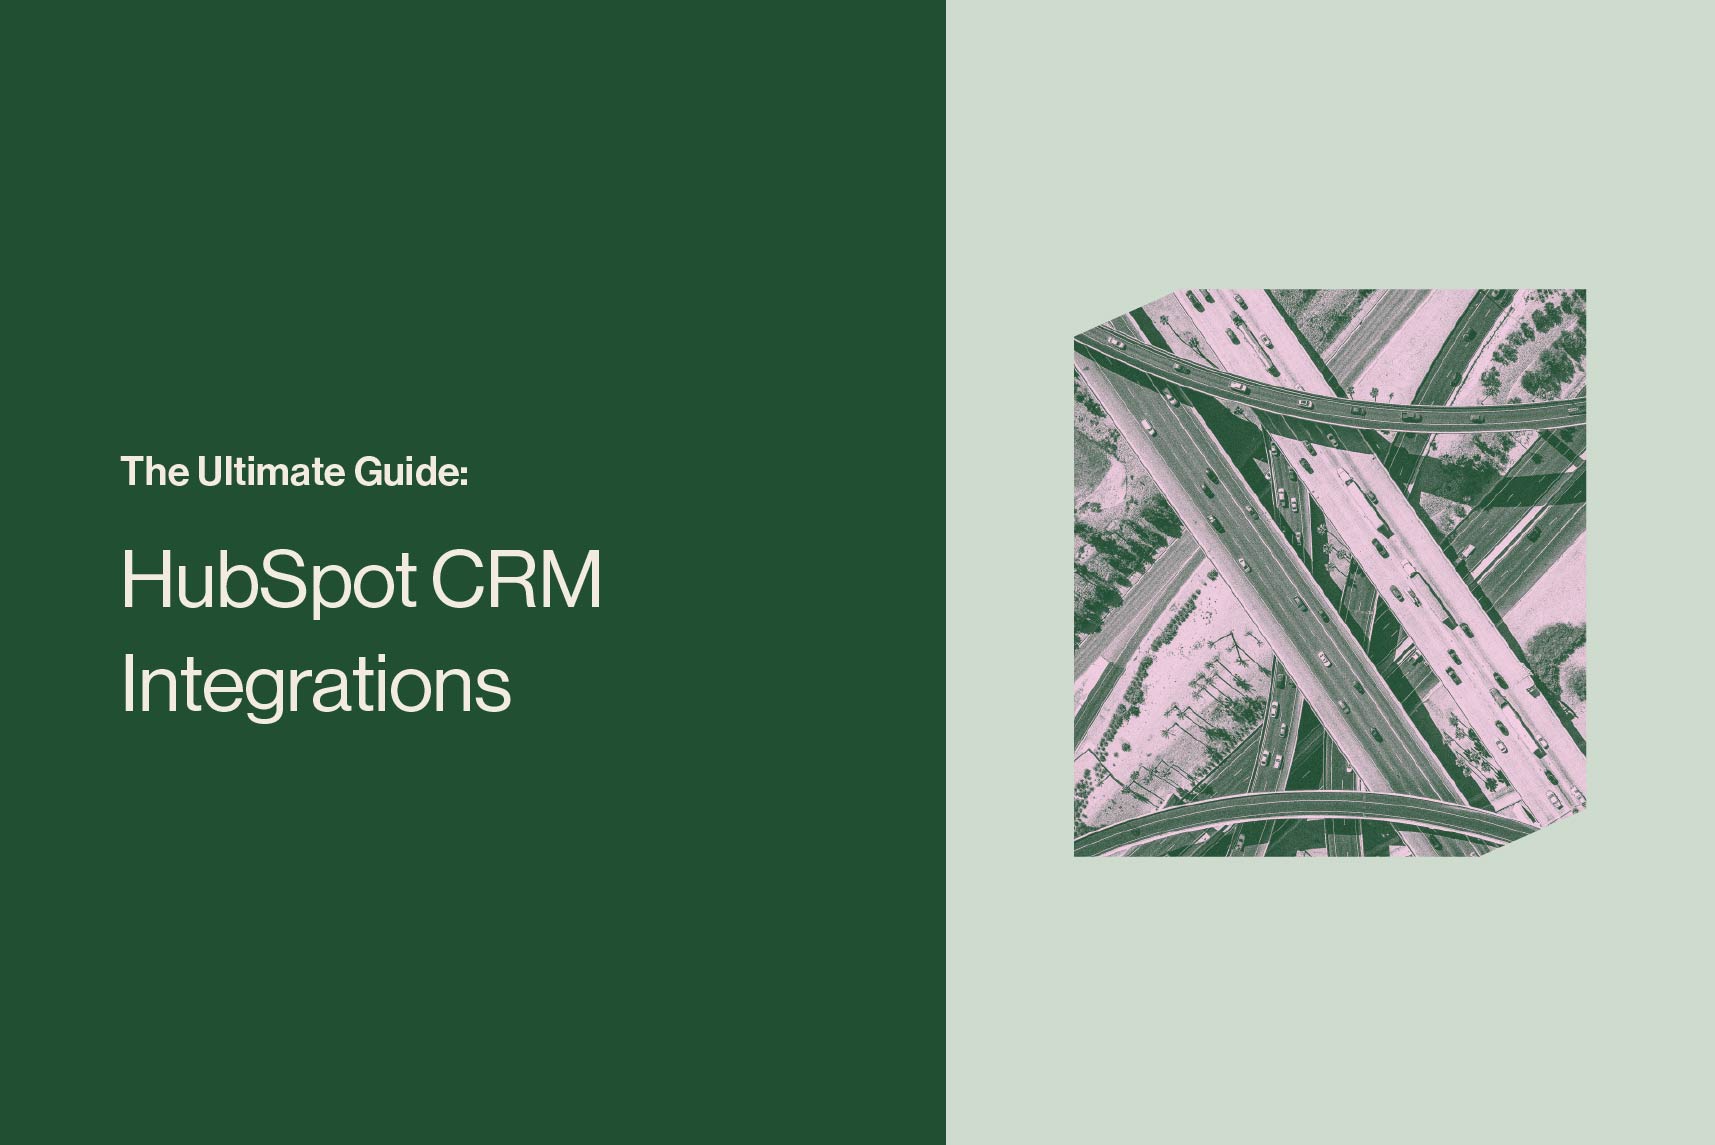 HubSpot CRM Integrations: The Ultimate Guide